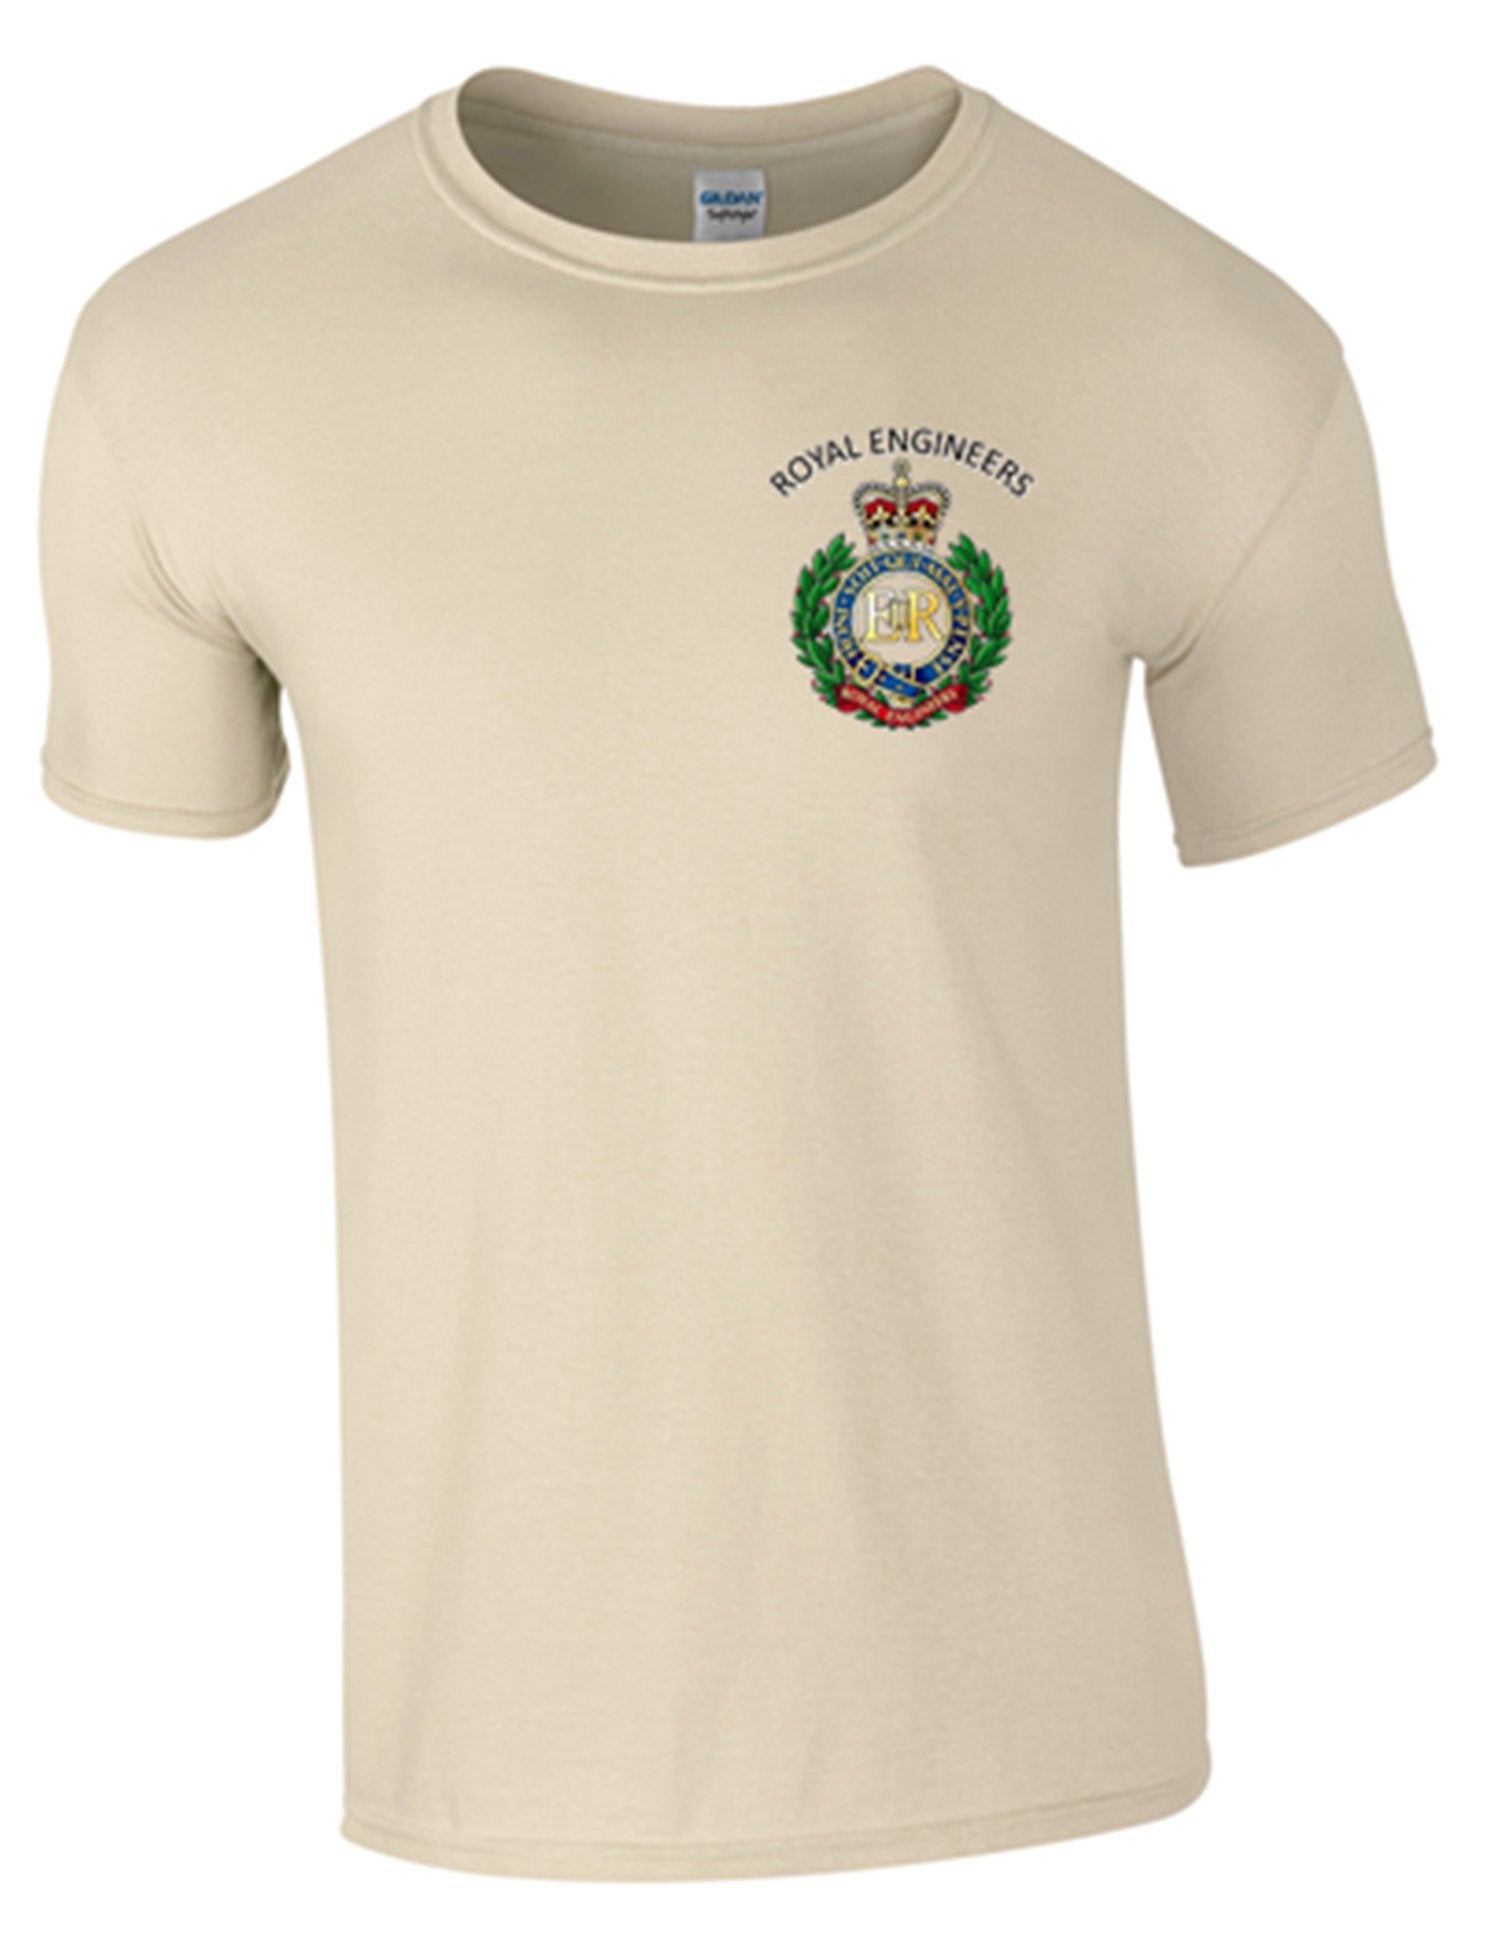 Bear Essentials Clothing. Royal Engineers T-Shirt Double Print in Colour - Army 1157 kit Sand / S Army 1157 Kit